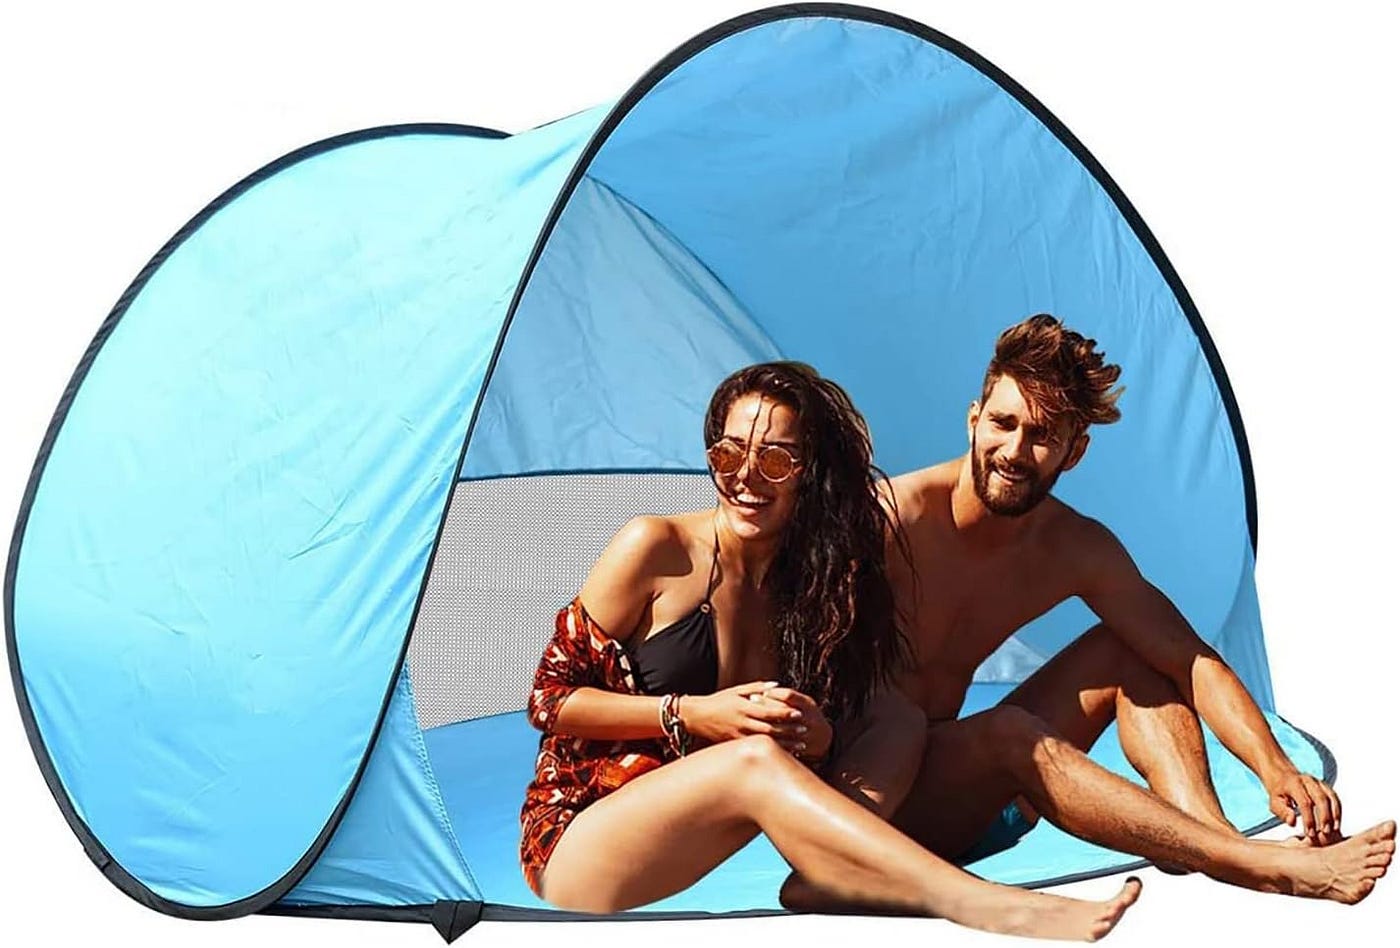 10+ Must-Have Summer Gadgets to Make Your Summer Unforgettable